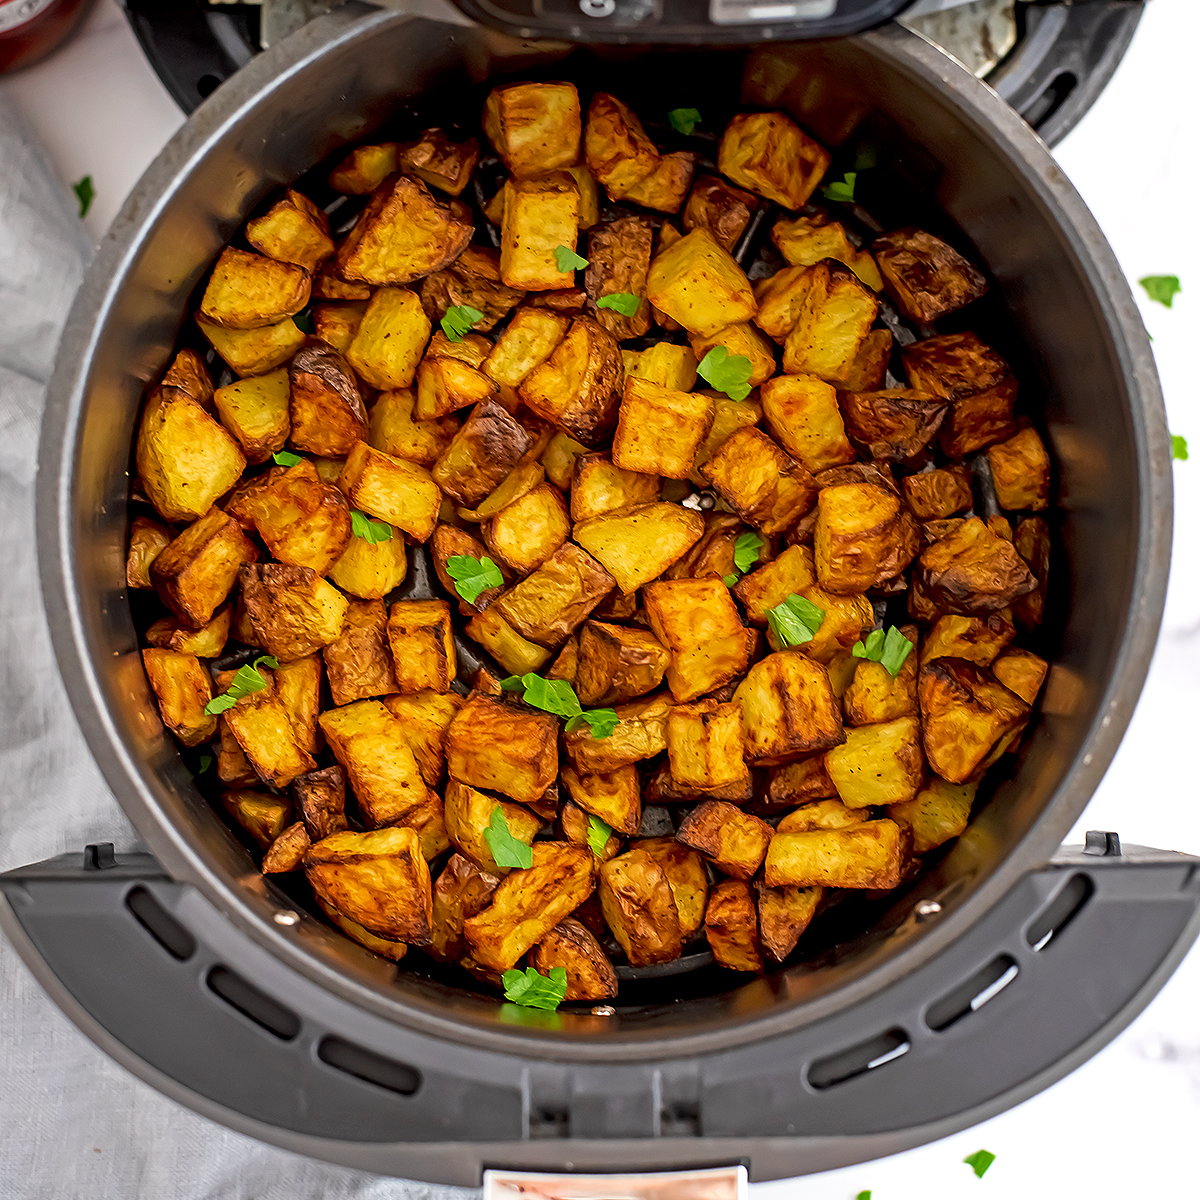 Cooked diced potatoes in air fryer basket.